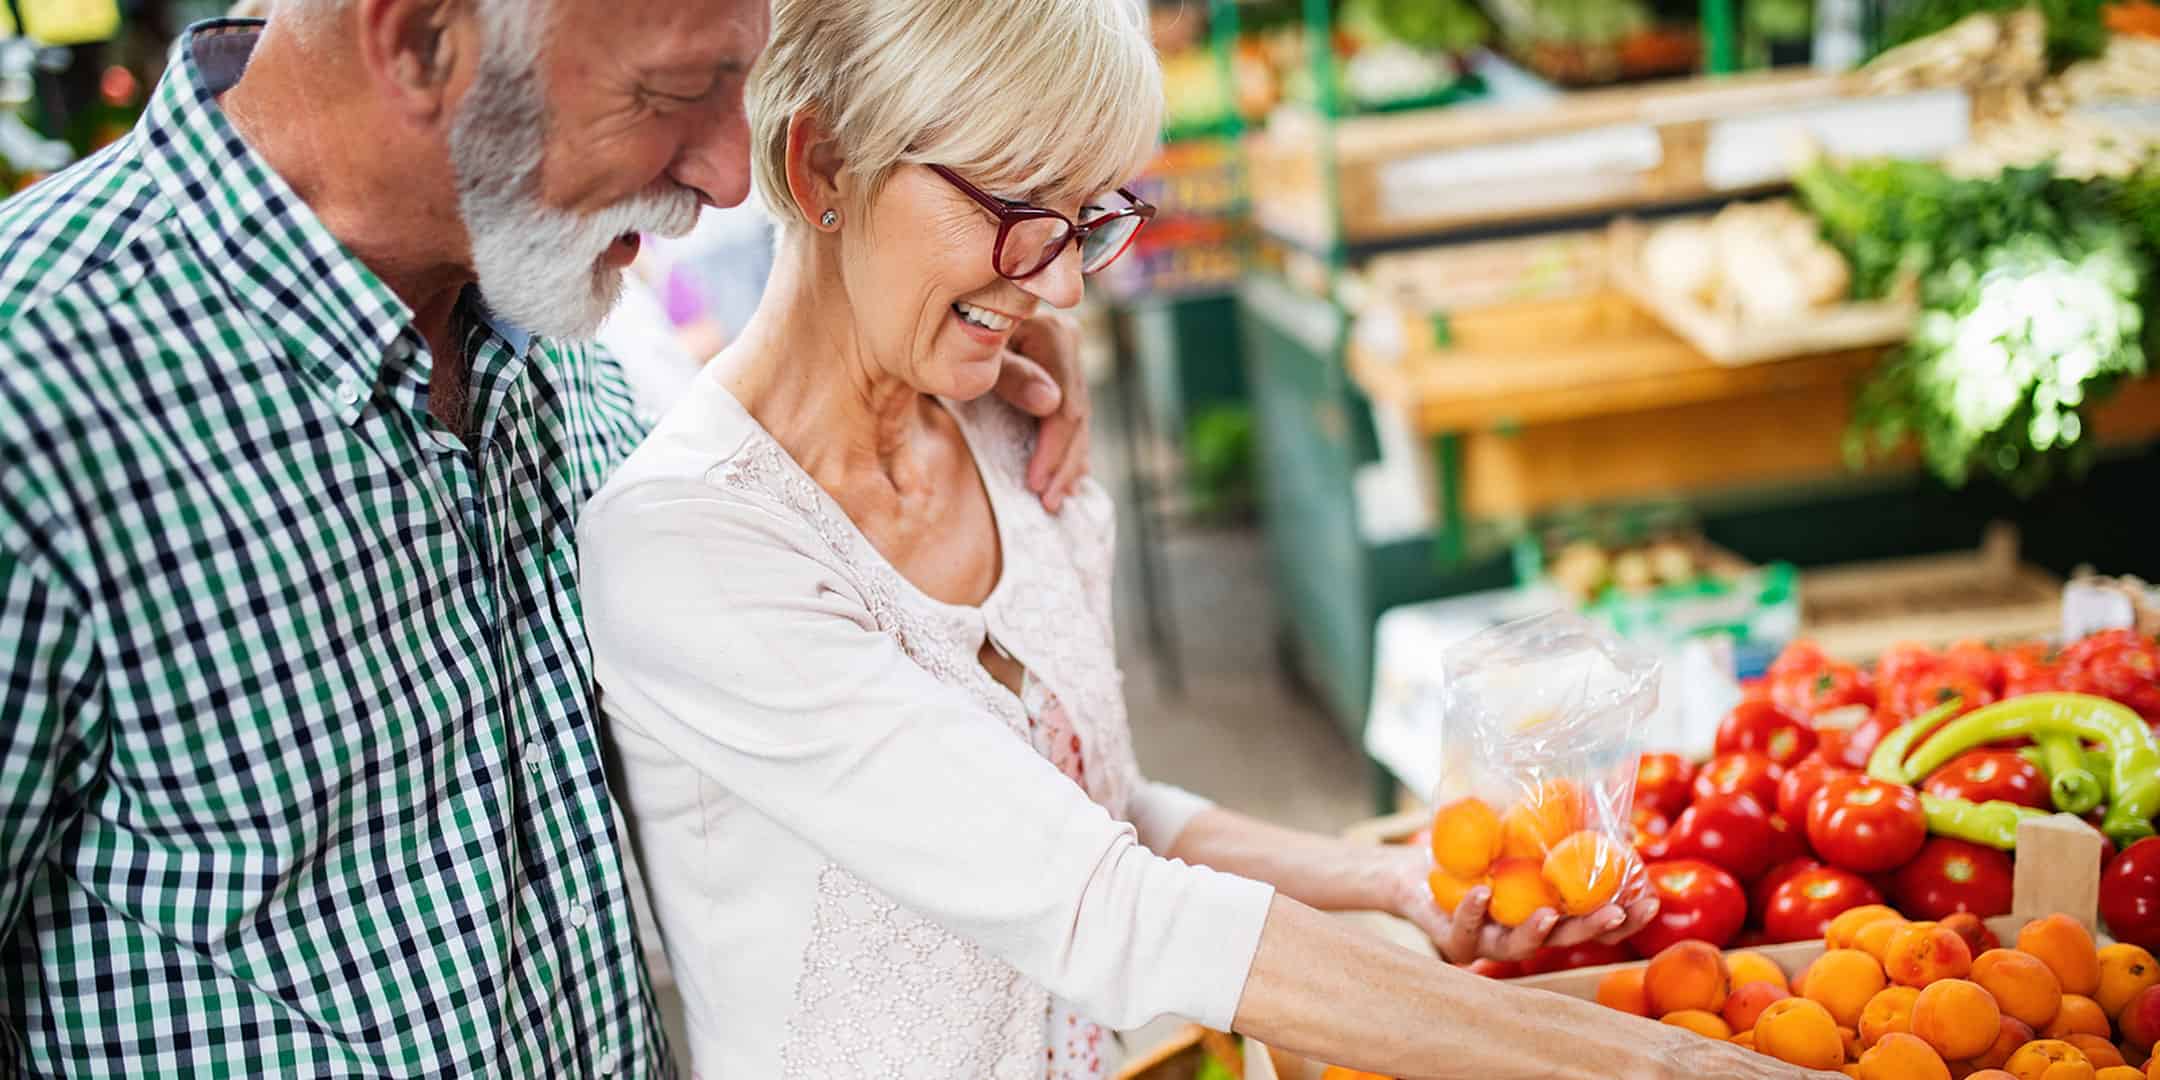 grocery carts for seniors